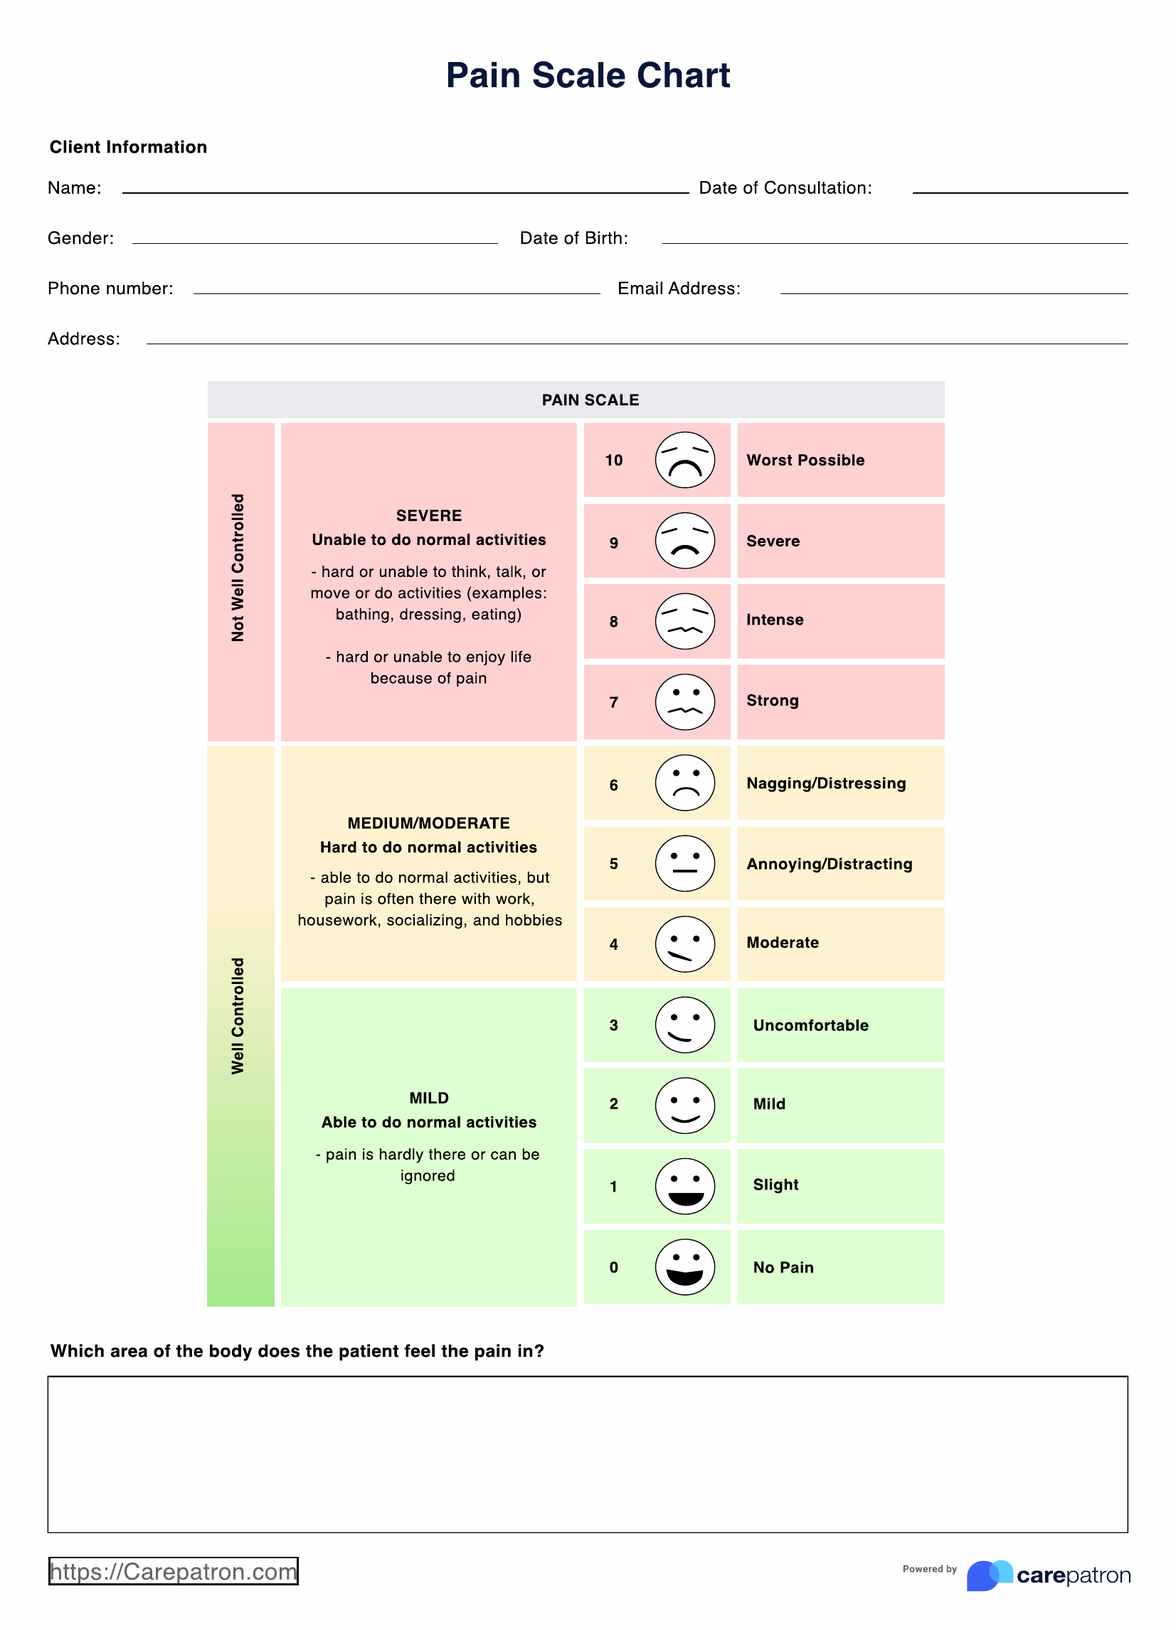 Pain Scale Chart PDF Example